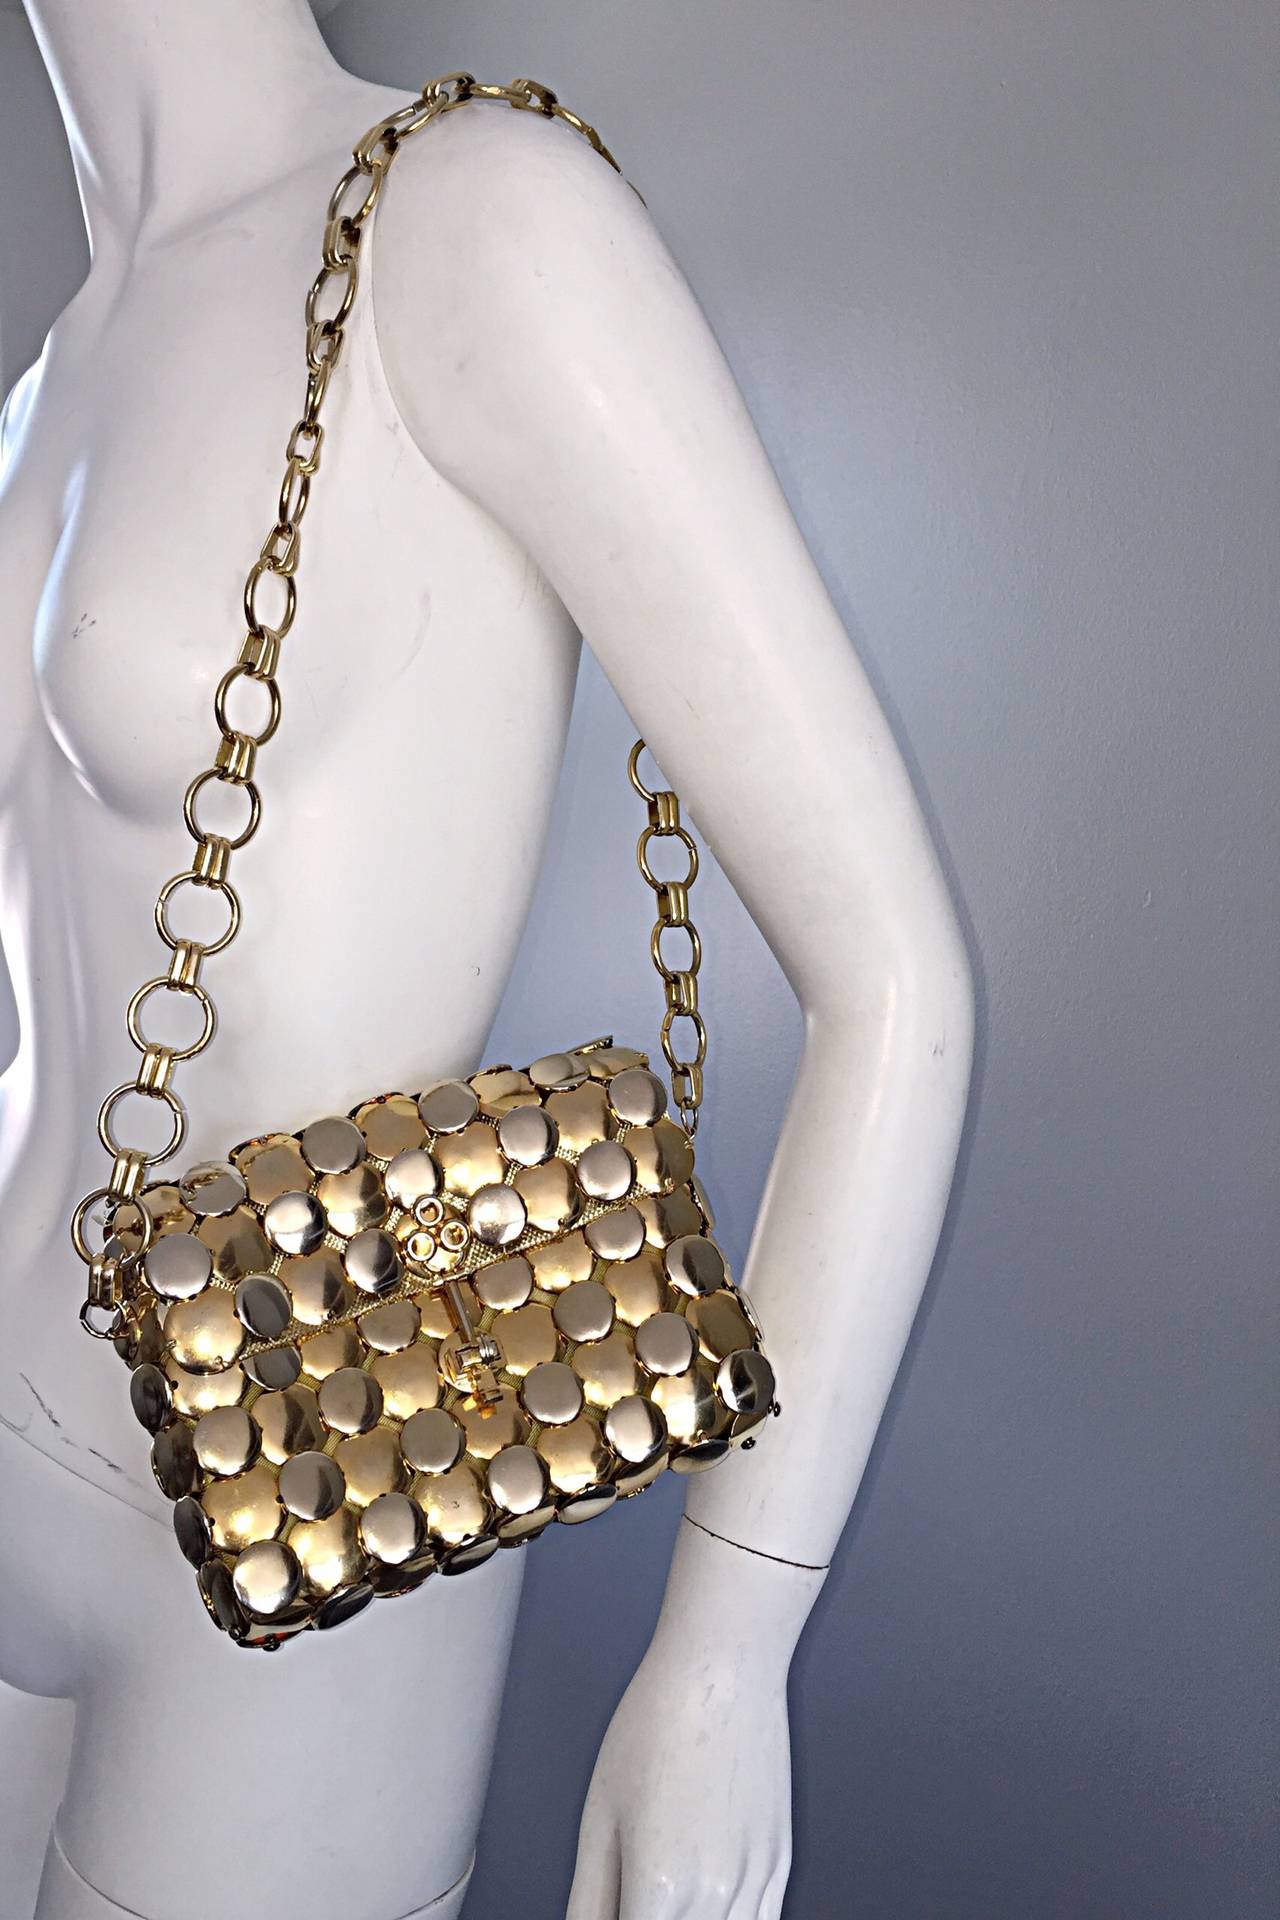 Extremely RARE 1960s vintage Paco Rabanne gold and silver metal disc purse! Beautiful chain strap, with key detail at closure. Fully lined in gold metallic thread silk. Perfect for day or night. Dress up a pair of jeans, or add a bit of umph to your